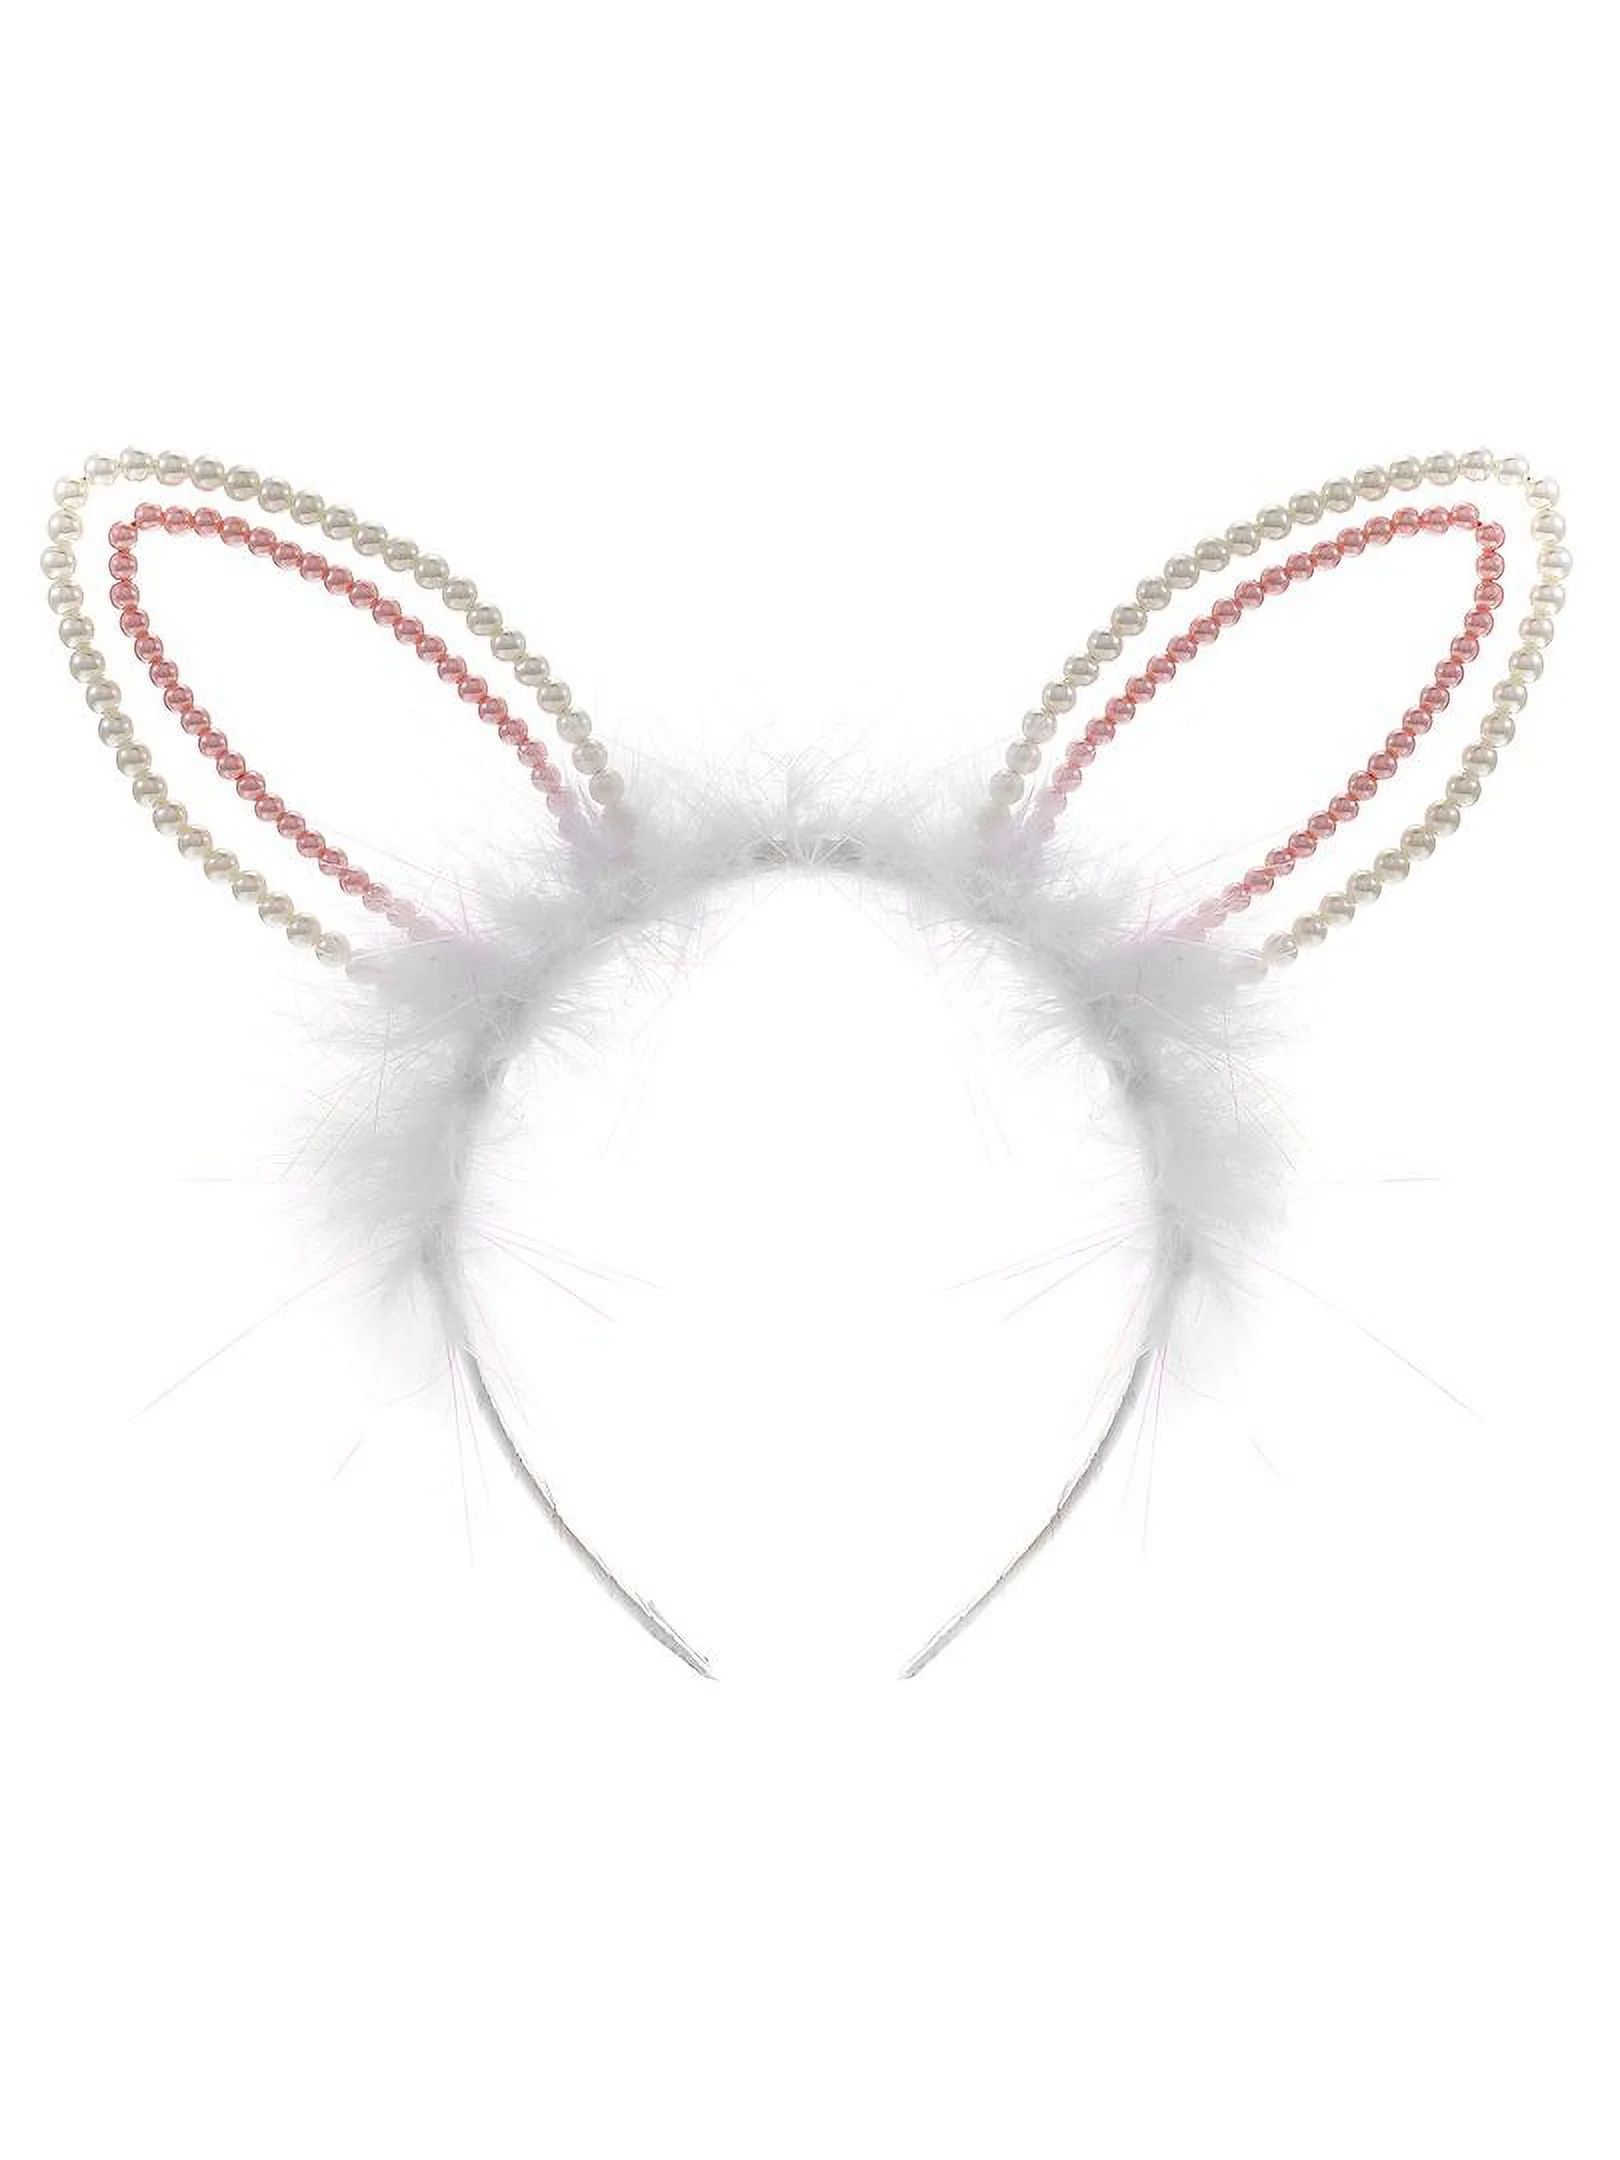 Way to Celebrate Easter Pearl and Faux Fur Bunny Ear Headband, Female, Pink | Walmart (US)